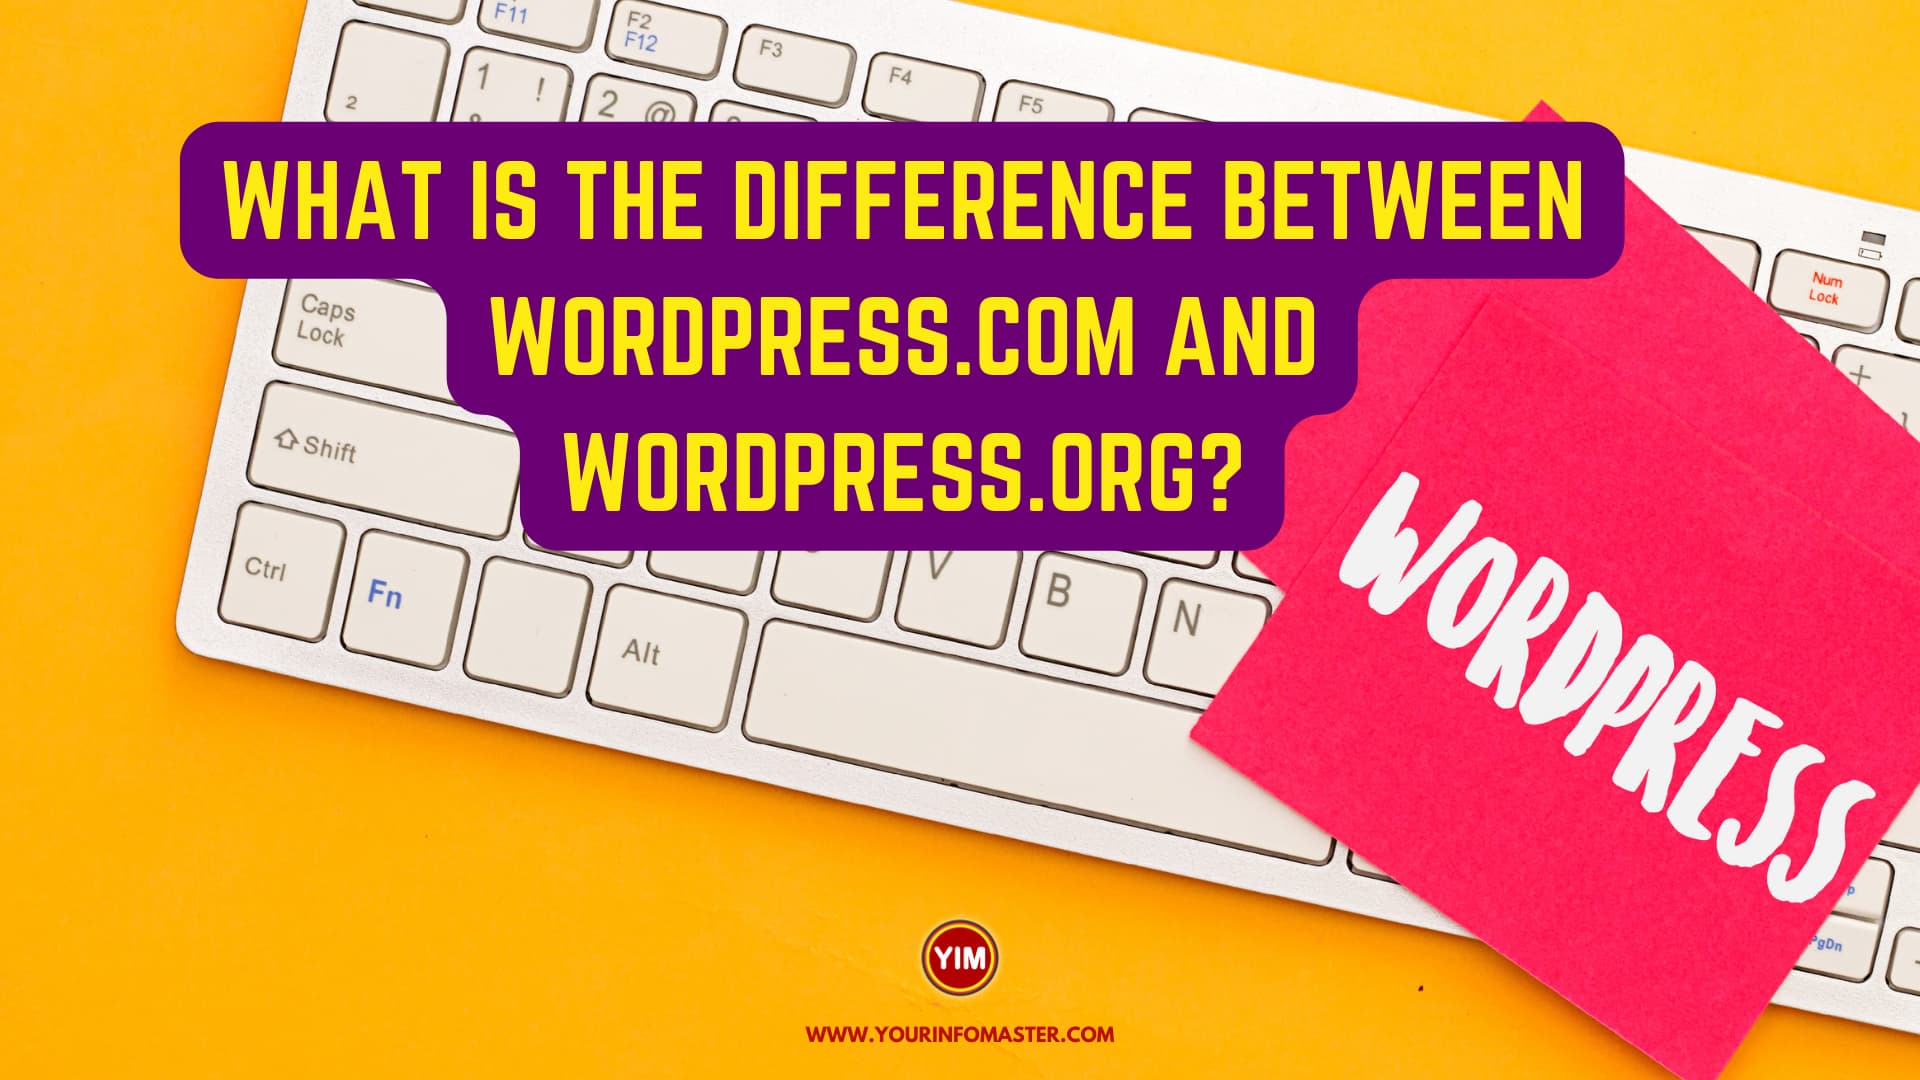 What is the difference between wordpress.com and wordpress.org